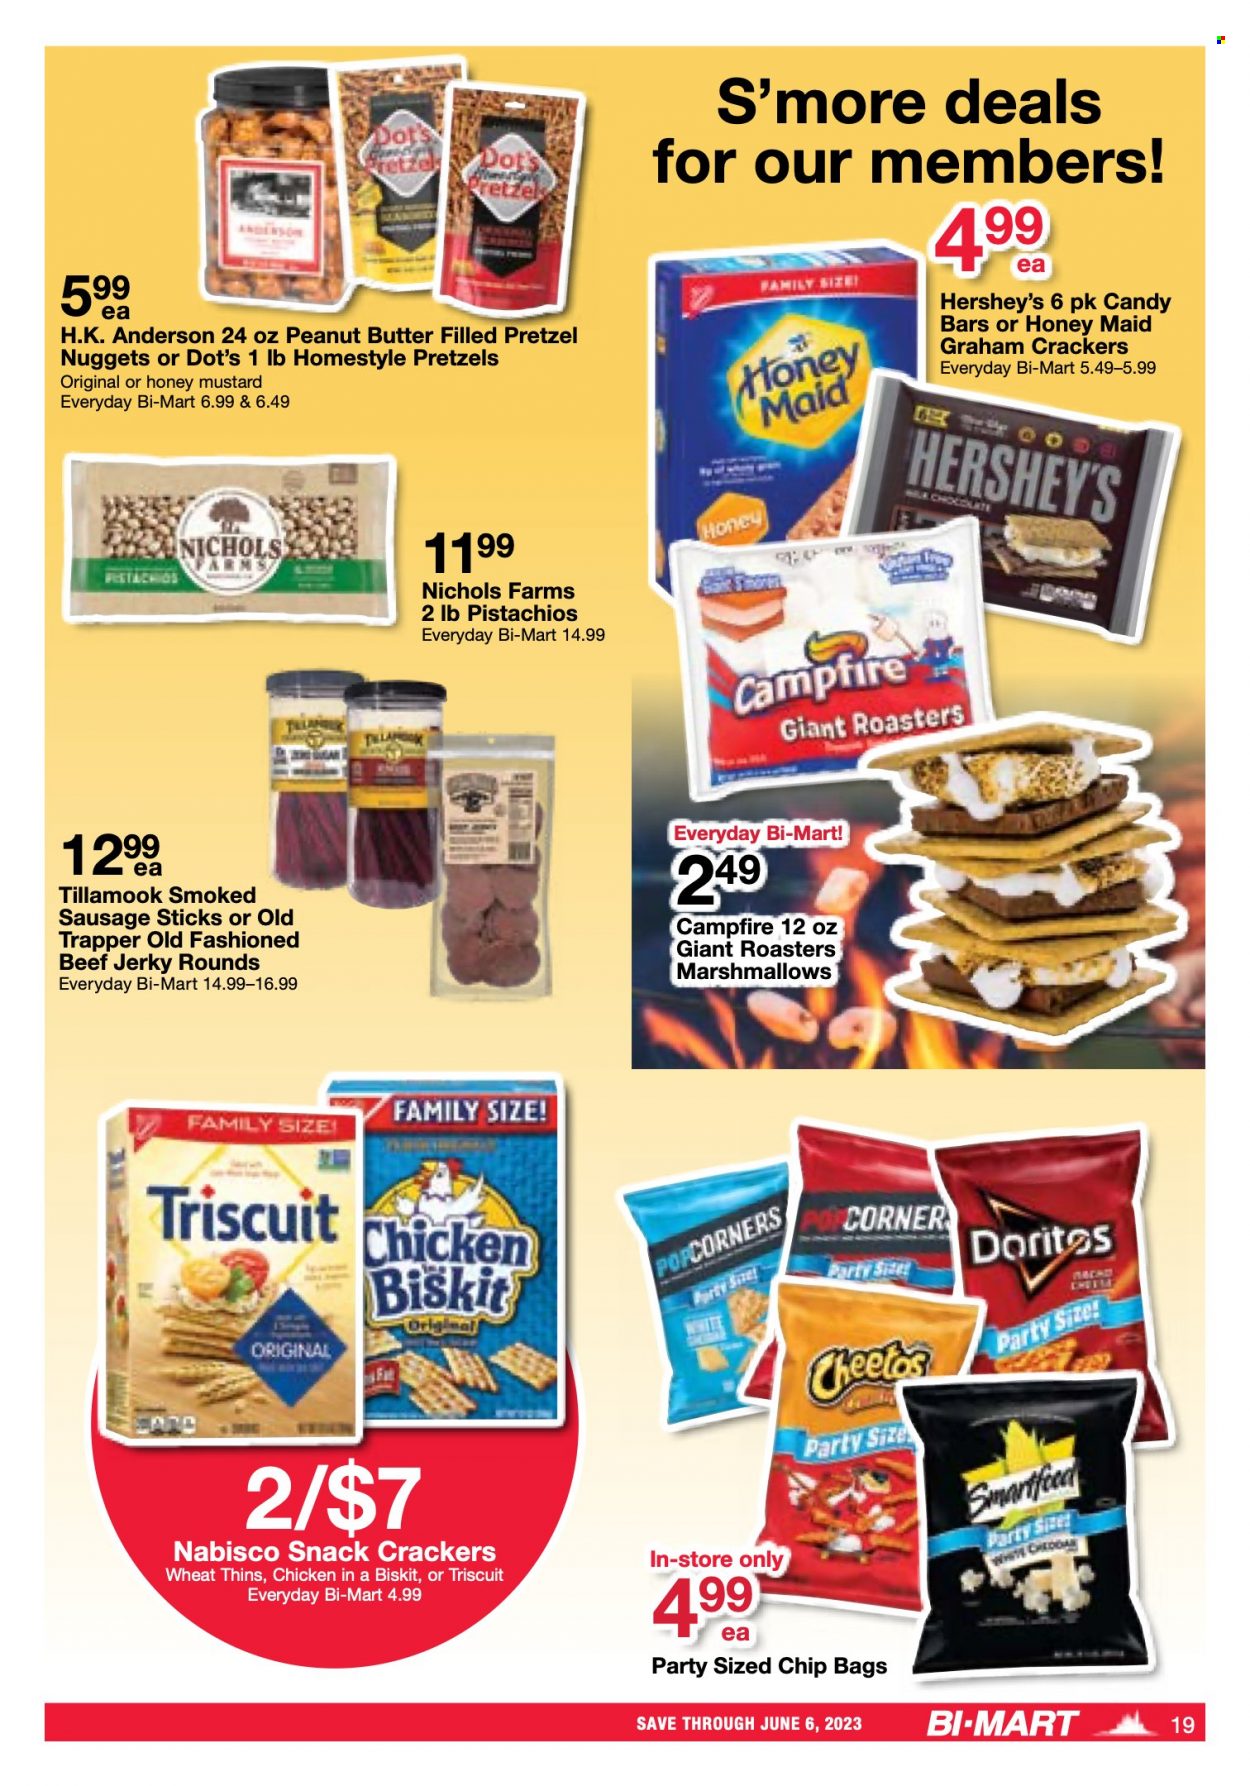 thumbnail - Bi-Mart Flyer - 05/23/2023 - 06/06/2023 - Sales products - pretzels, nuggets, beef jerky, jerky, snack, sausage, smoked sausage, cheese, Hershey's, graham crackers, marshmallows, crackers, candy bar, Nabisco, Doritos, Cheetos, Thins, popcorn, salty snack, Honey Maid, mustard, honey mustard, peanut butter, pistachios, chicken, Campfire. Page 18.